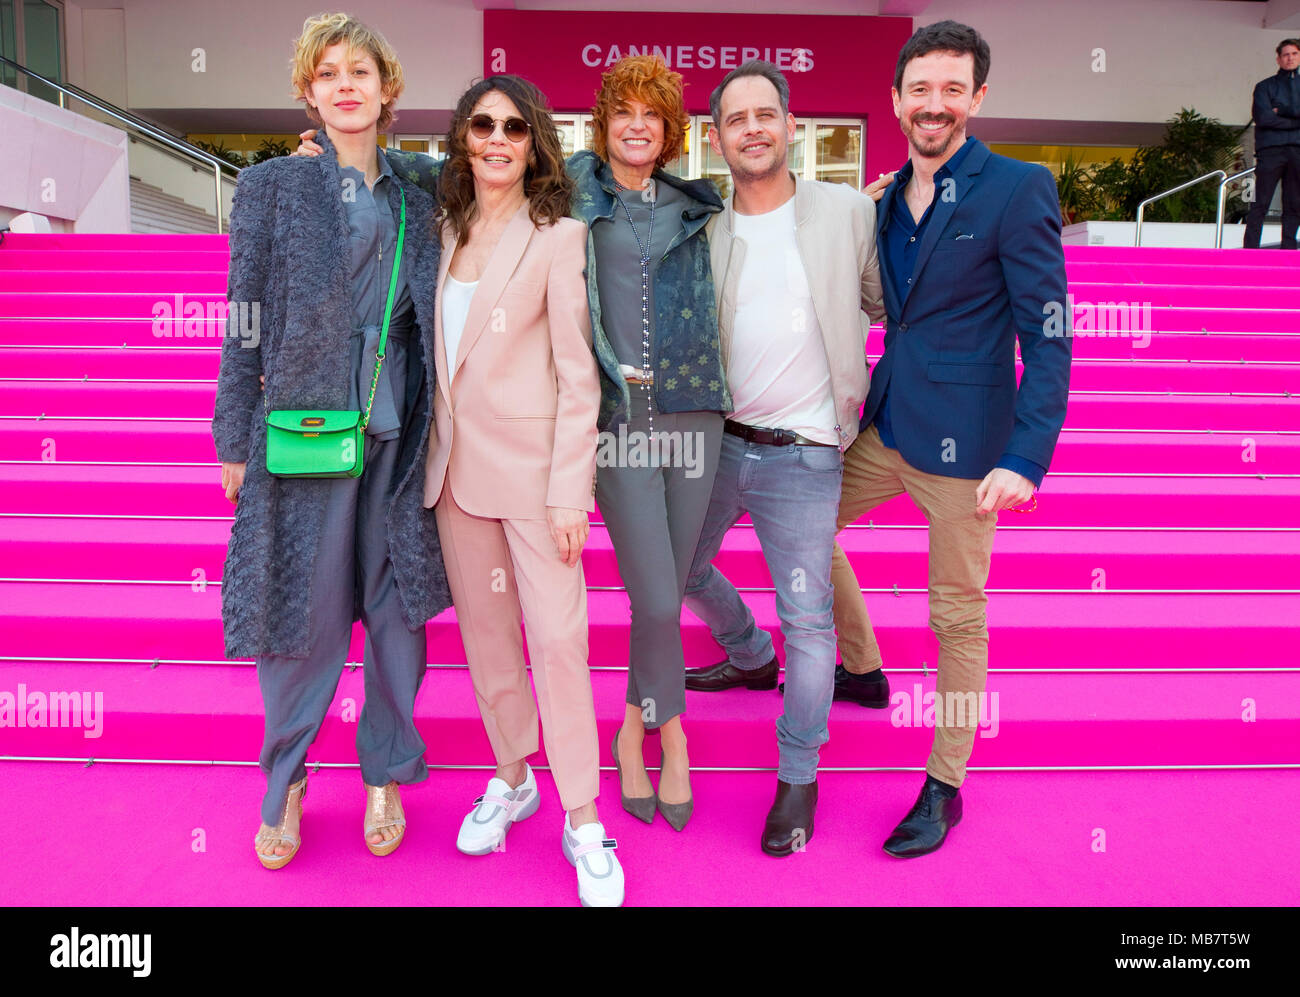 Cannes, France. 08th Apr, 2018. Cannes, France - April 08, 2018: MIPTV Canneseries with Actors Iris Berben and Moritz Bleibtreu and Producer Oliver Berben with Writer Nina Grosse.The Typist, Die Protokollantin, MIPCOM, a Reed MIDEM Event, ZDF, Beta Film, Moovie | usage worldwide Credit: dpa/Alamy Live News Stock Photo